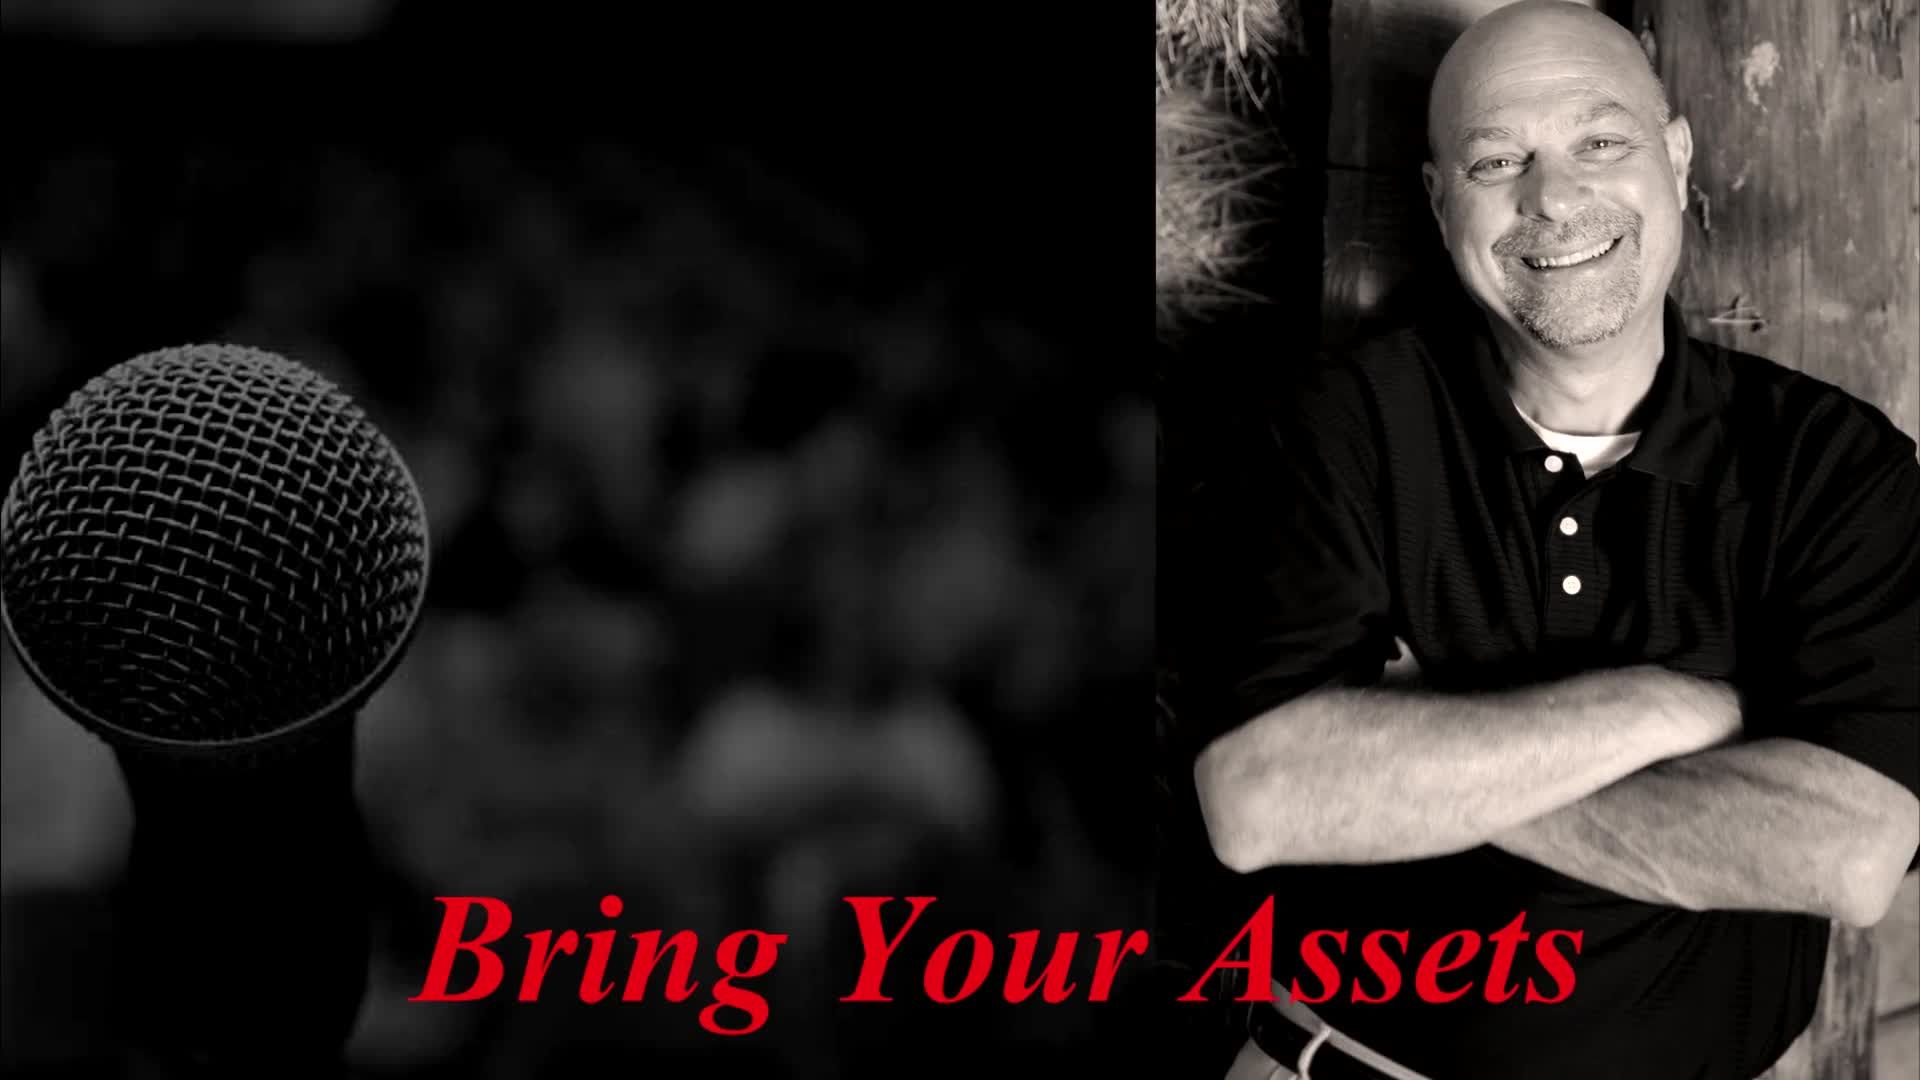 Bring your assets not your agenda